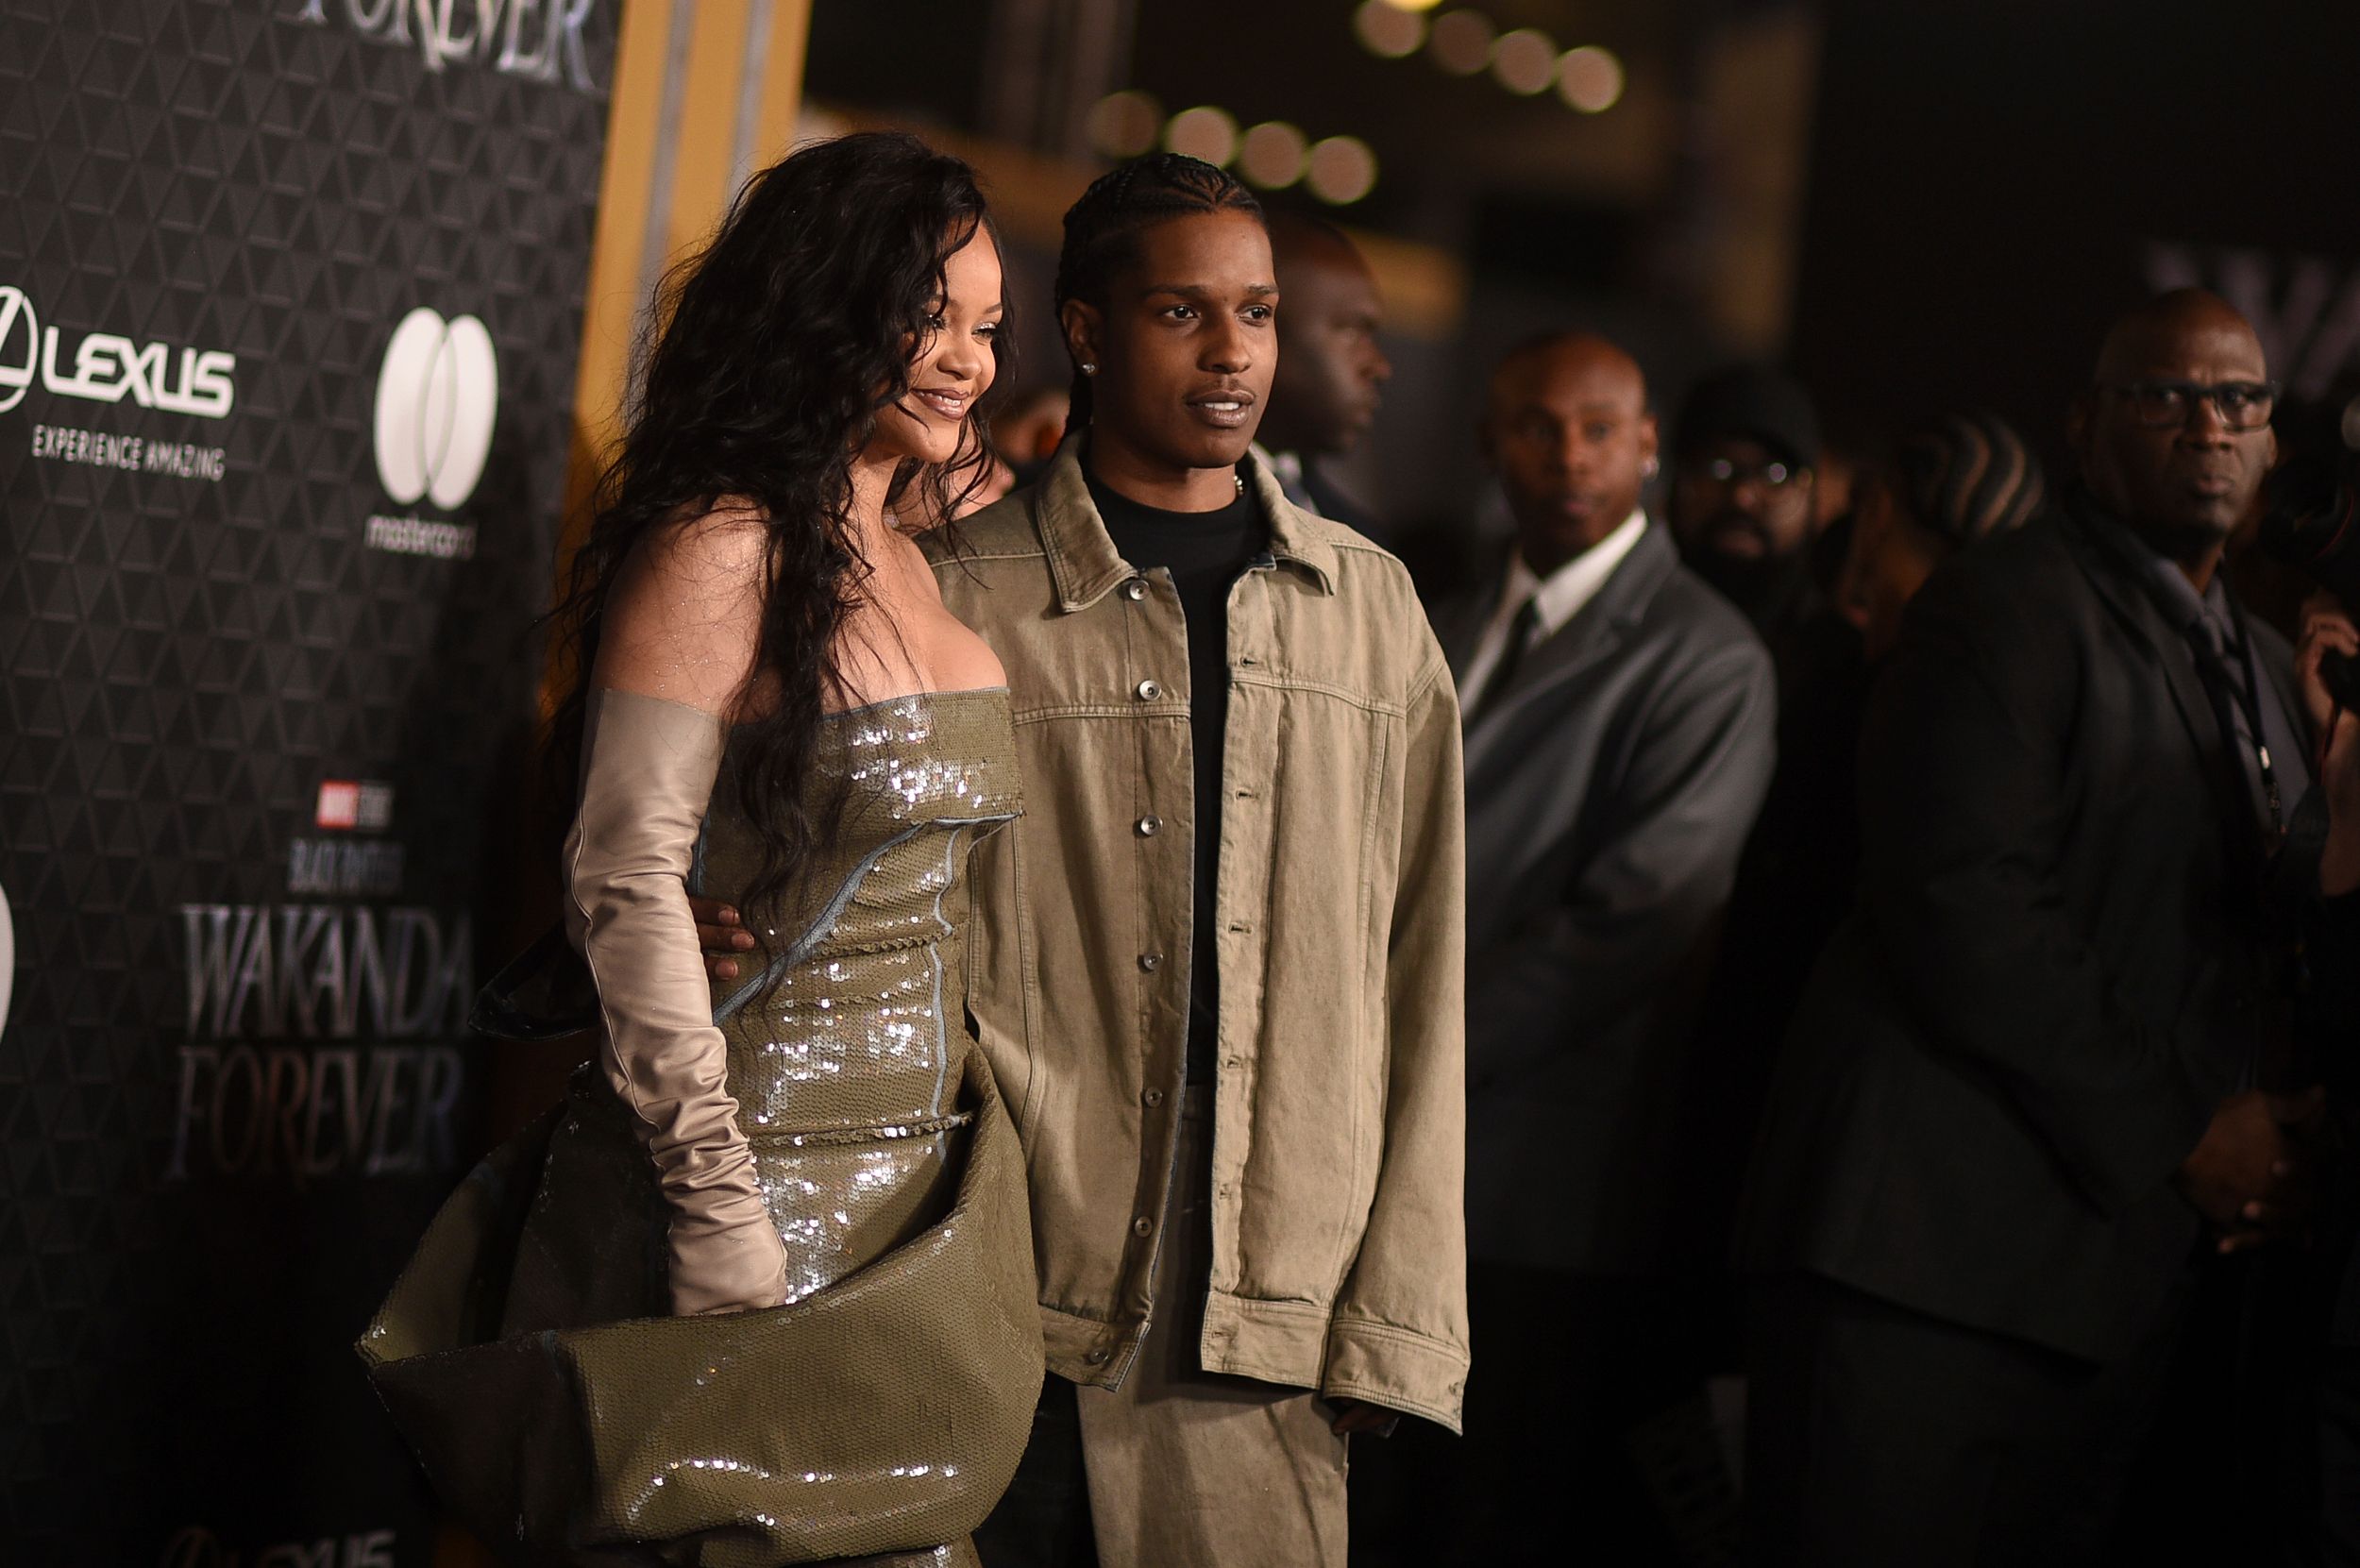 Rihanna and A$AP Rocky: A Complete Relationship Timeline - See